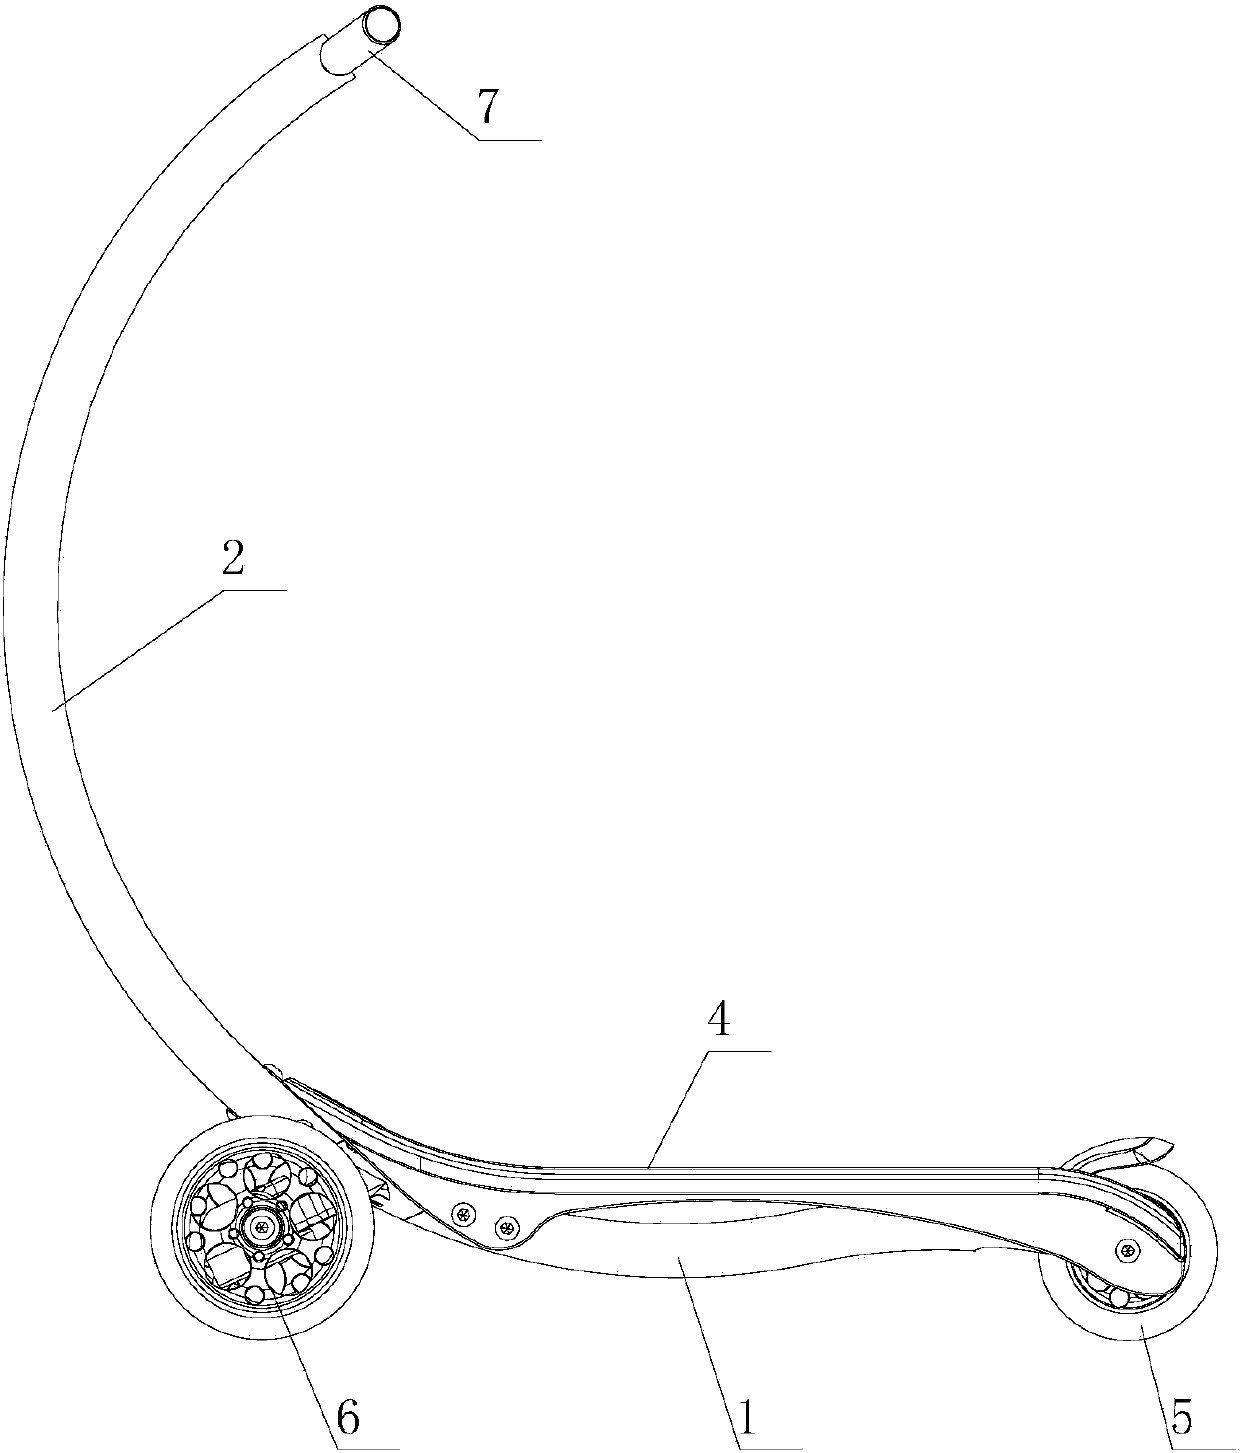 Scooter capable of automatically turning